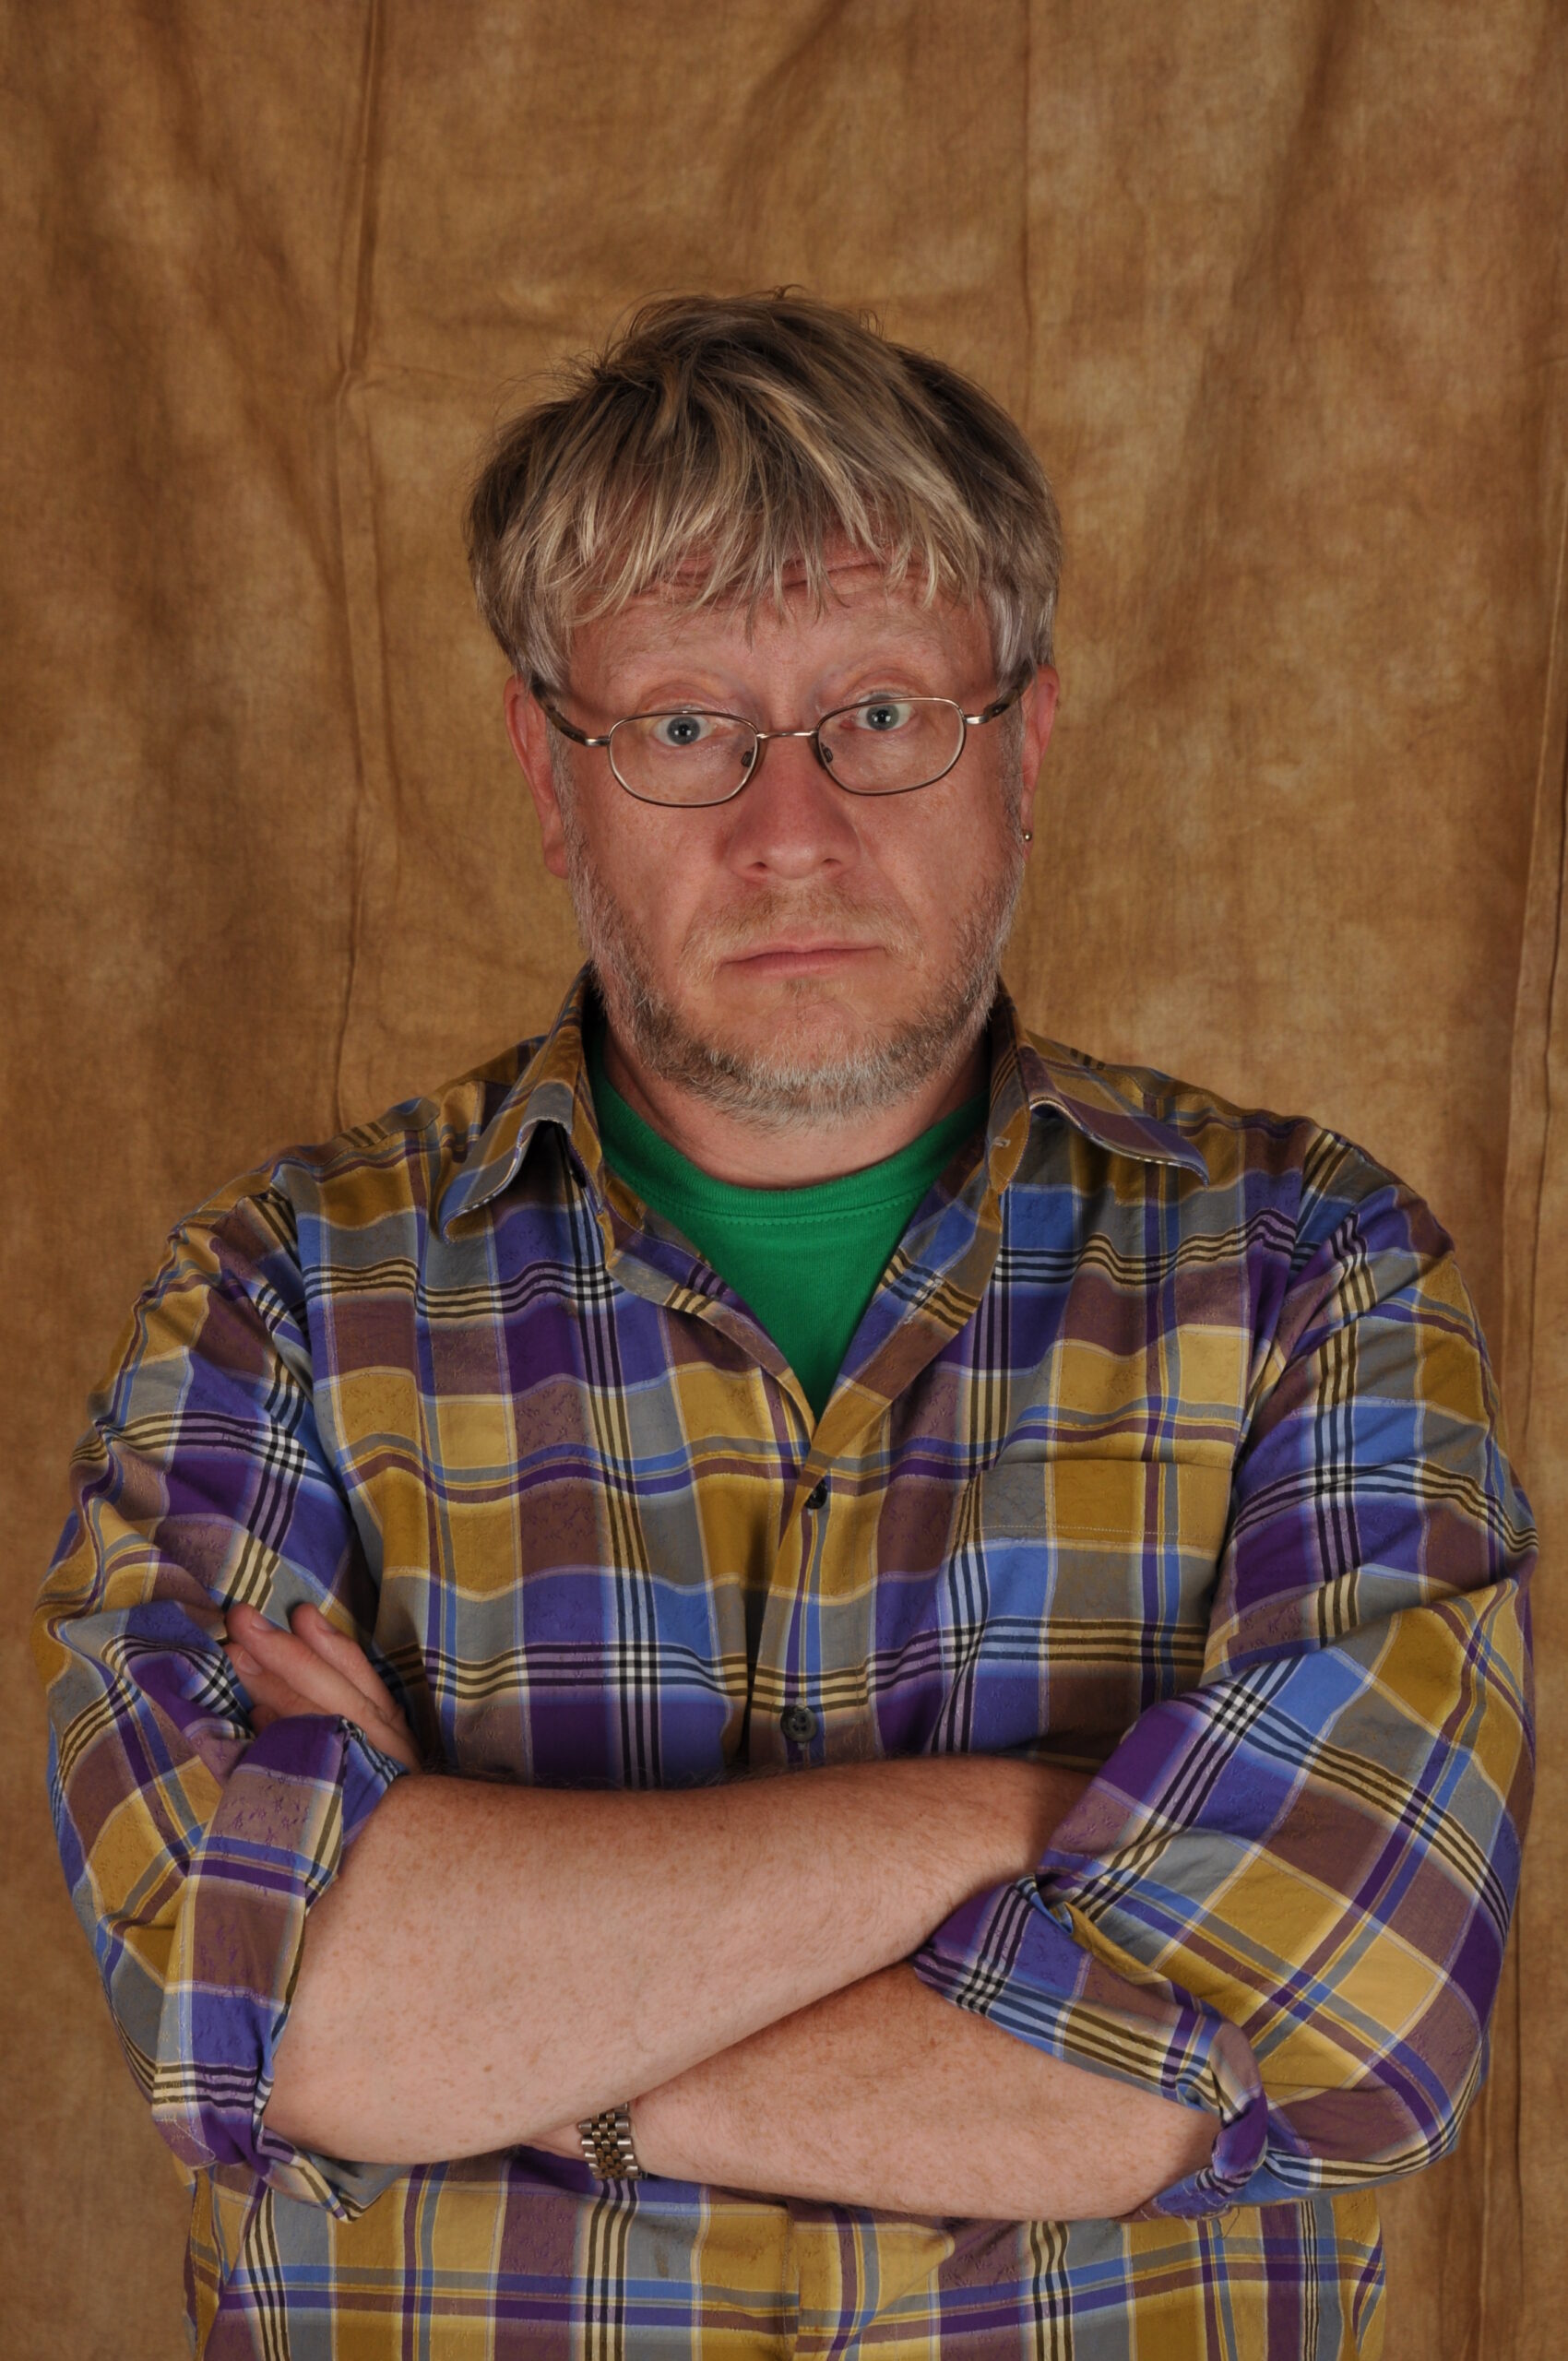 Older man with glasses and a plaid shirt crosses his arms in front of a brown backdrop.